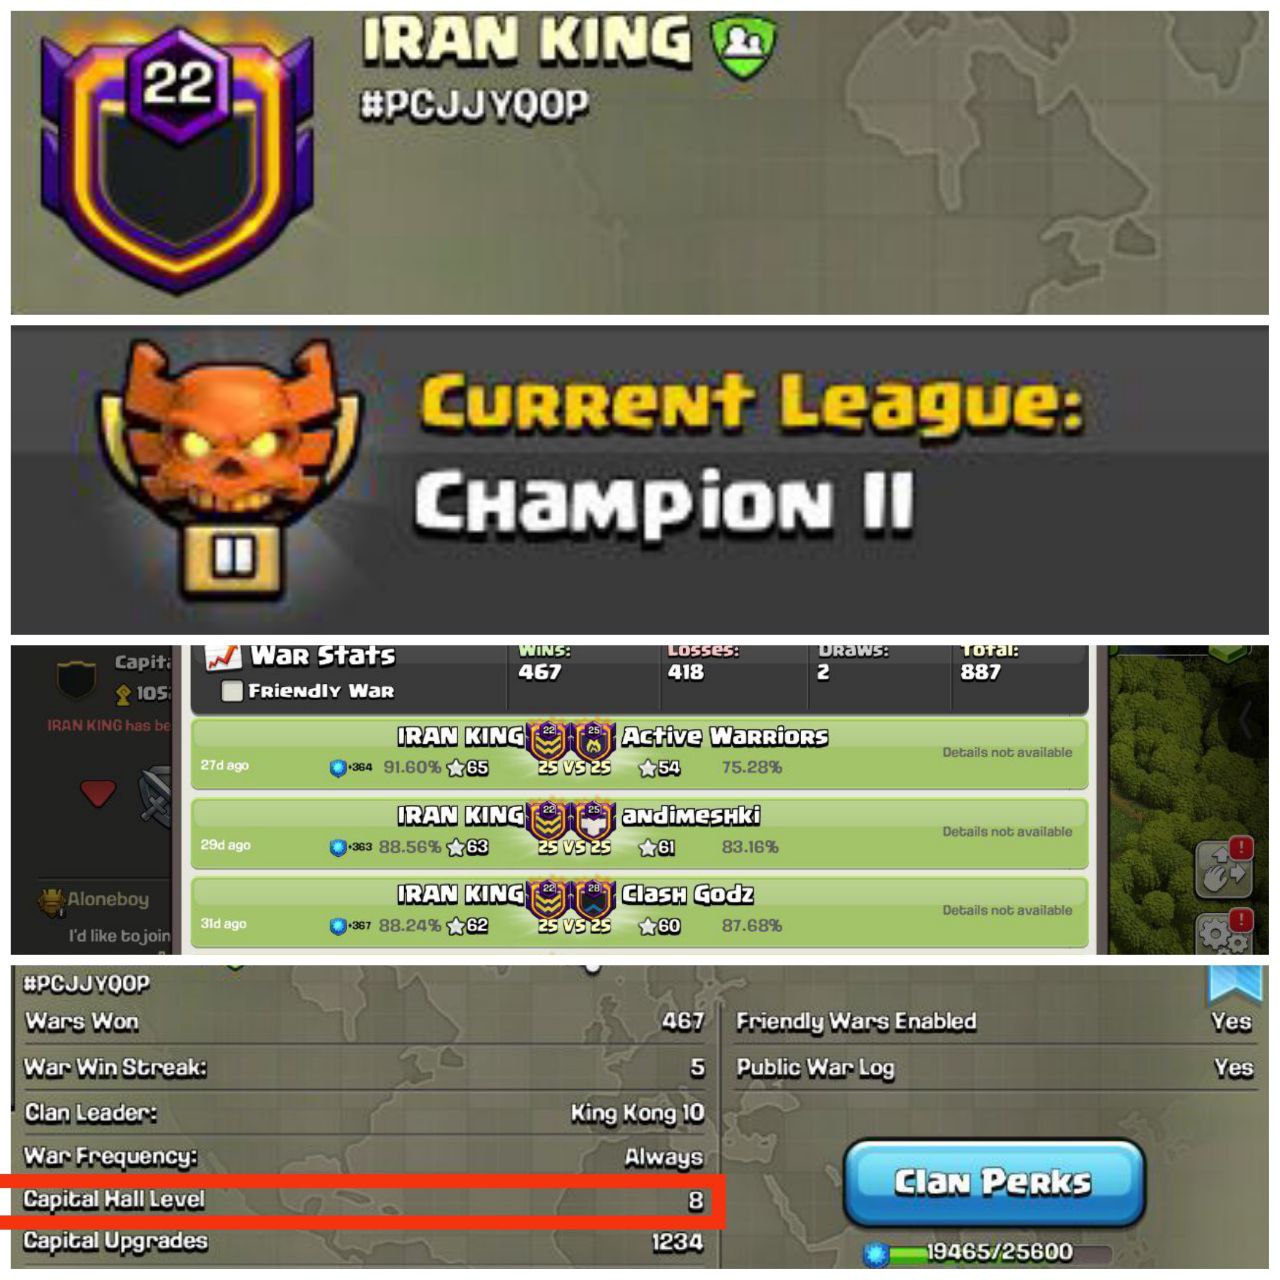 IRAN KING -- Lvl-22 -- Champion 2 -- CC-8 -- Positive Log -- Brilliant and Superb Name And League